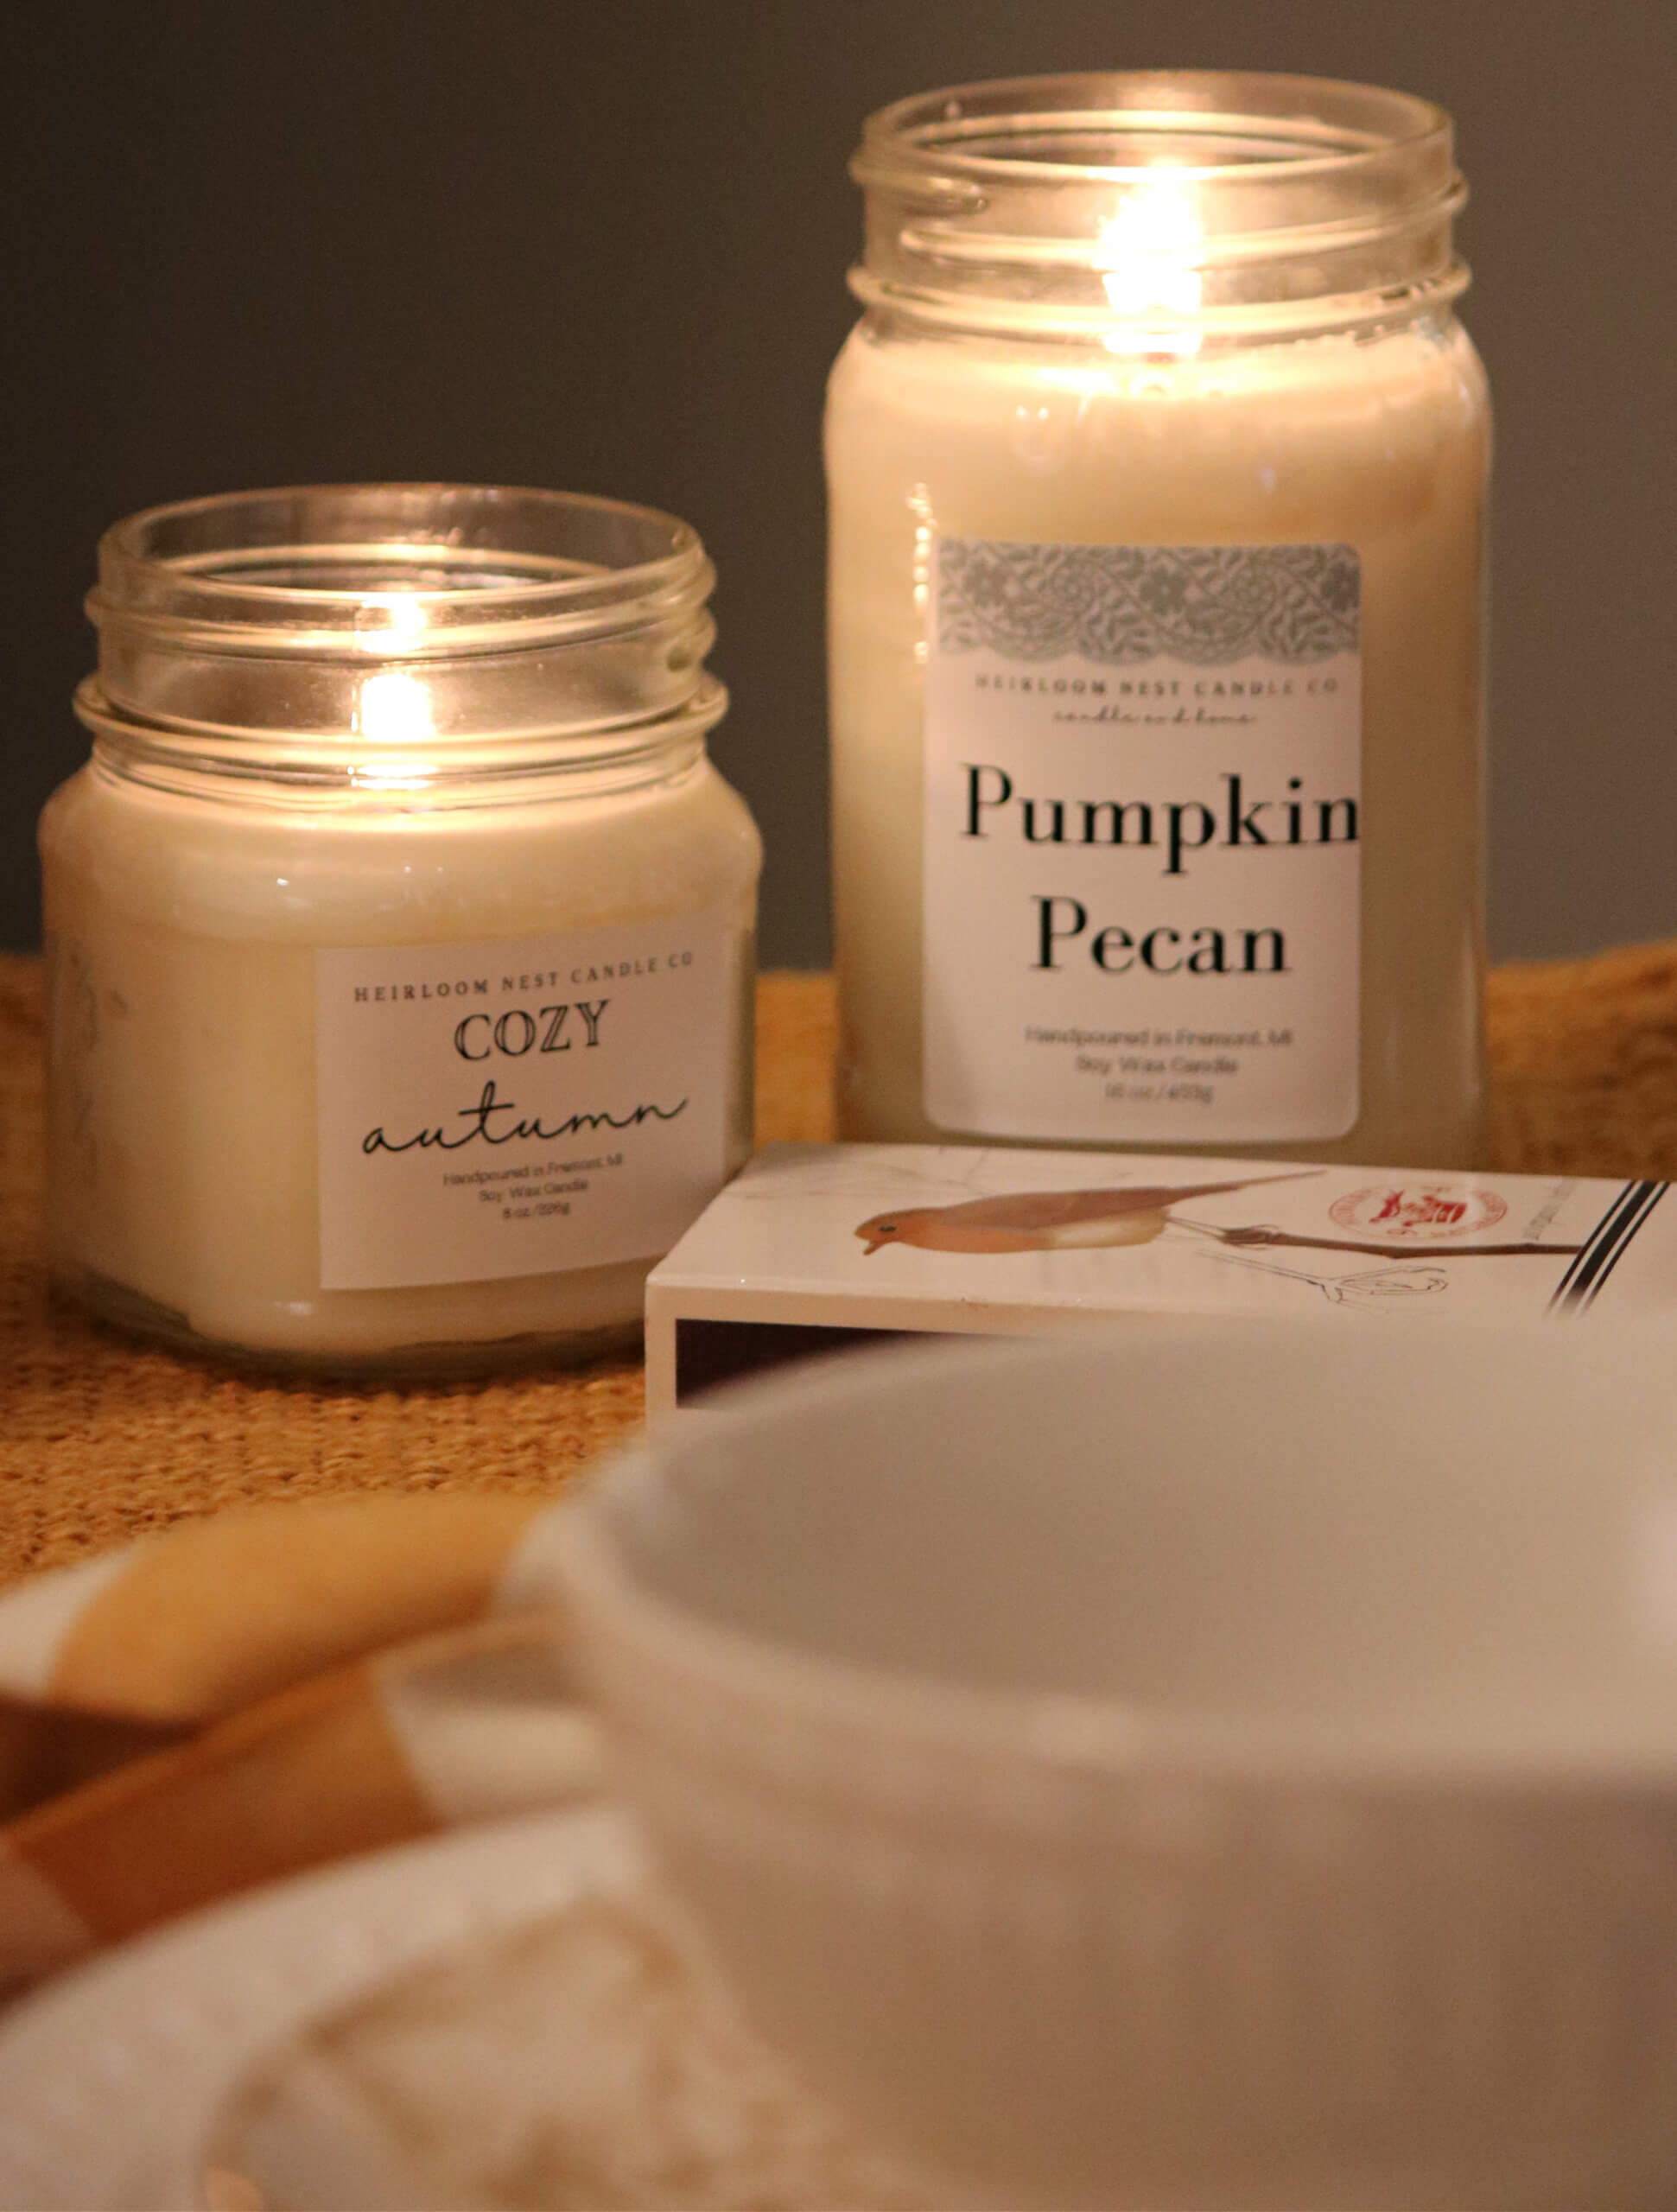 Two fall candles I ordered from an Etsy shop.